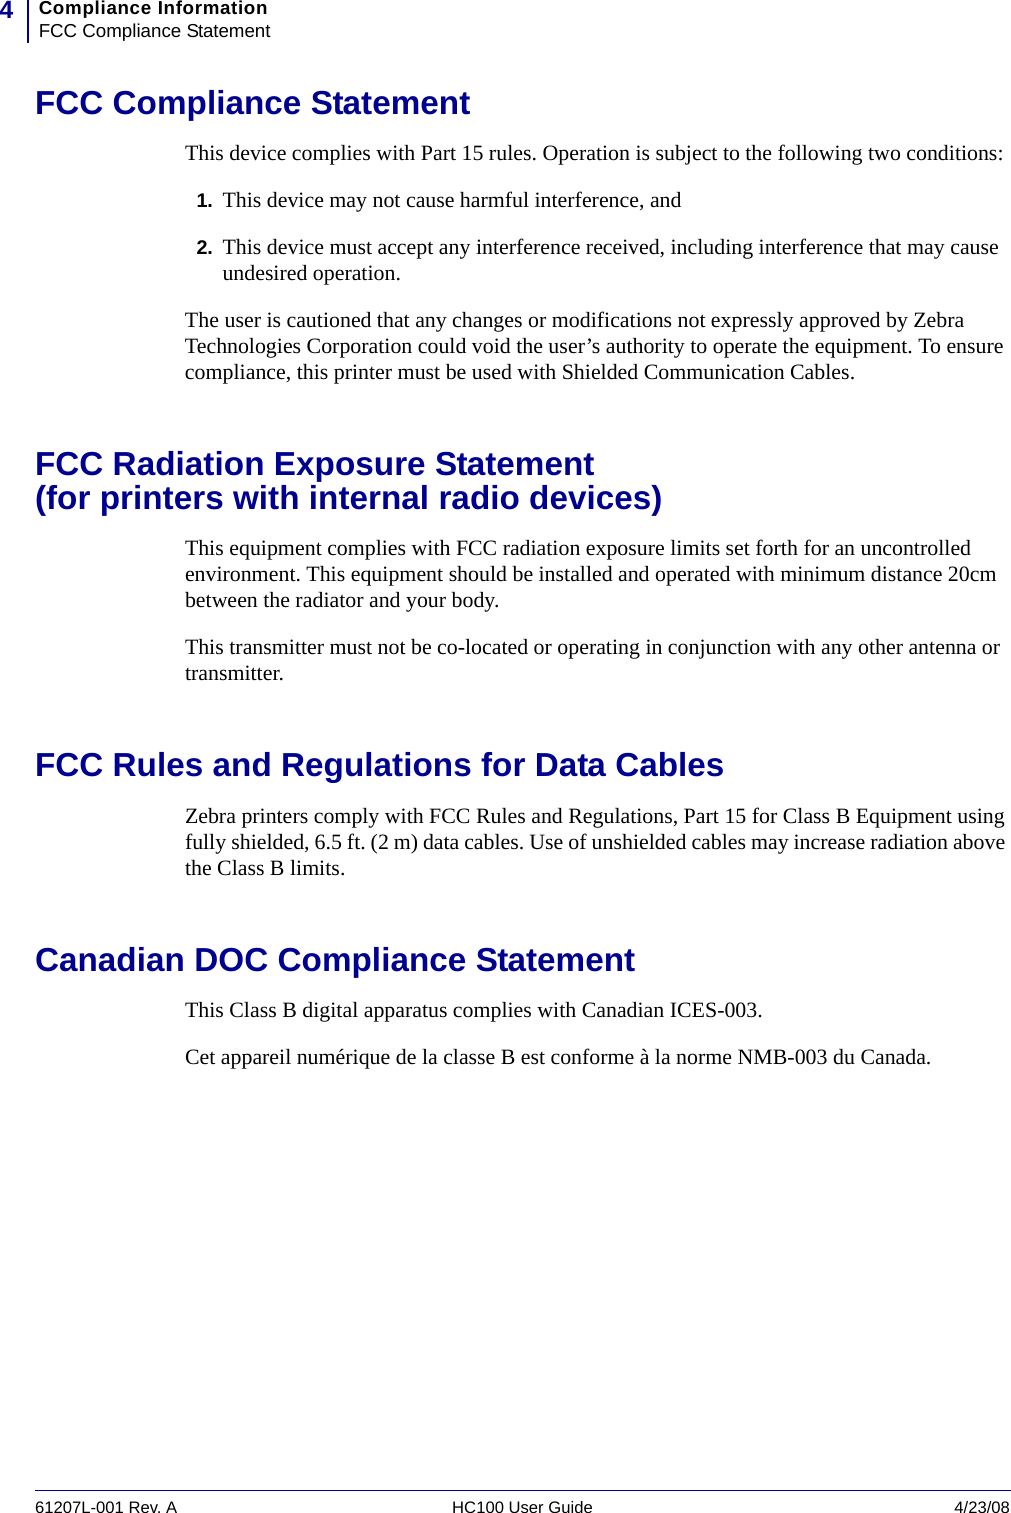 Compliance InformationFCC Compliance Statement461207L-001 Rev. A HC100 User Guide 4/23/08FCC Compliance StatementThis device complies with Part 15 rules. Operation is subject to the following two conditions:1. This device may not cause harmful interference, and2. This device must accept any interference received, including interference that may cause undesired operation.The user is cautioned that any changes or modifications not expressly approved by Zebra Technologies Corporation could void the user’s authority to operate the equipment. To ensure compliance, this printer must be used with Shielded Communication Cables.FCC Radiation Exposure Statement (for printers with internal radio devices)This equipment complies with FCC radiation exposure limits set forth for an uncontrolled environment. This equipment should be installed and operated with minimum distance 20cm between the radiator and your body.This transmitter must not be co-located or operating in conjunction with any other antenna or transmitter.FCC Rules and Regulations for Data CablesZebra printers comply with FCC Rules and Regulations, Part 15 for Class B Equipment using fully shielded, 6.5 ft. (2 m) data cables. Use of unshielded cables may increase radiation above the Class B limits. Canadian DOC Compliance StatementThis Class B digital apparatus complies with Canadian ICES-003. Cet appareil numérique de la classe B est conforme à la norme NMB-003 du Canada.